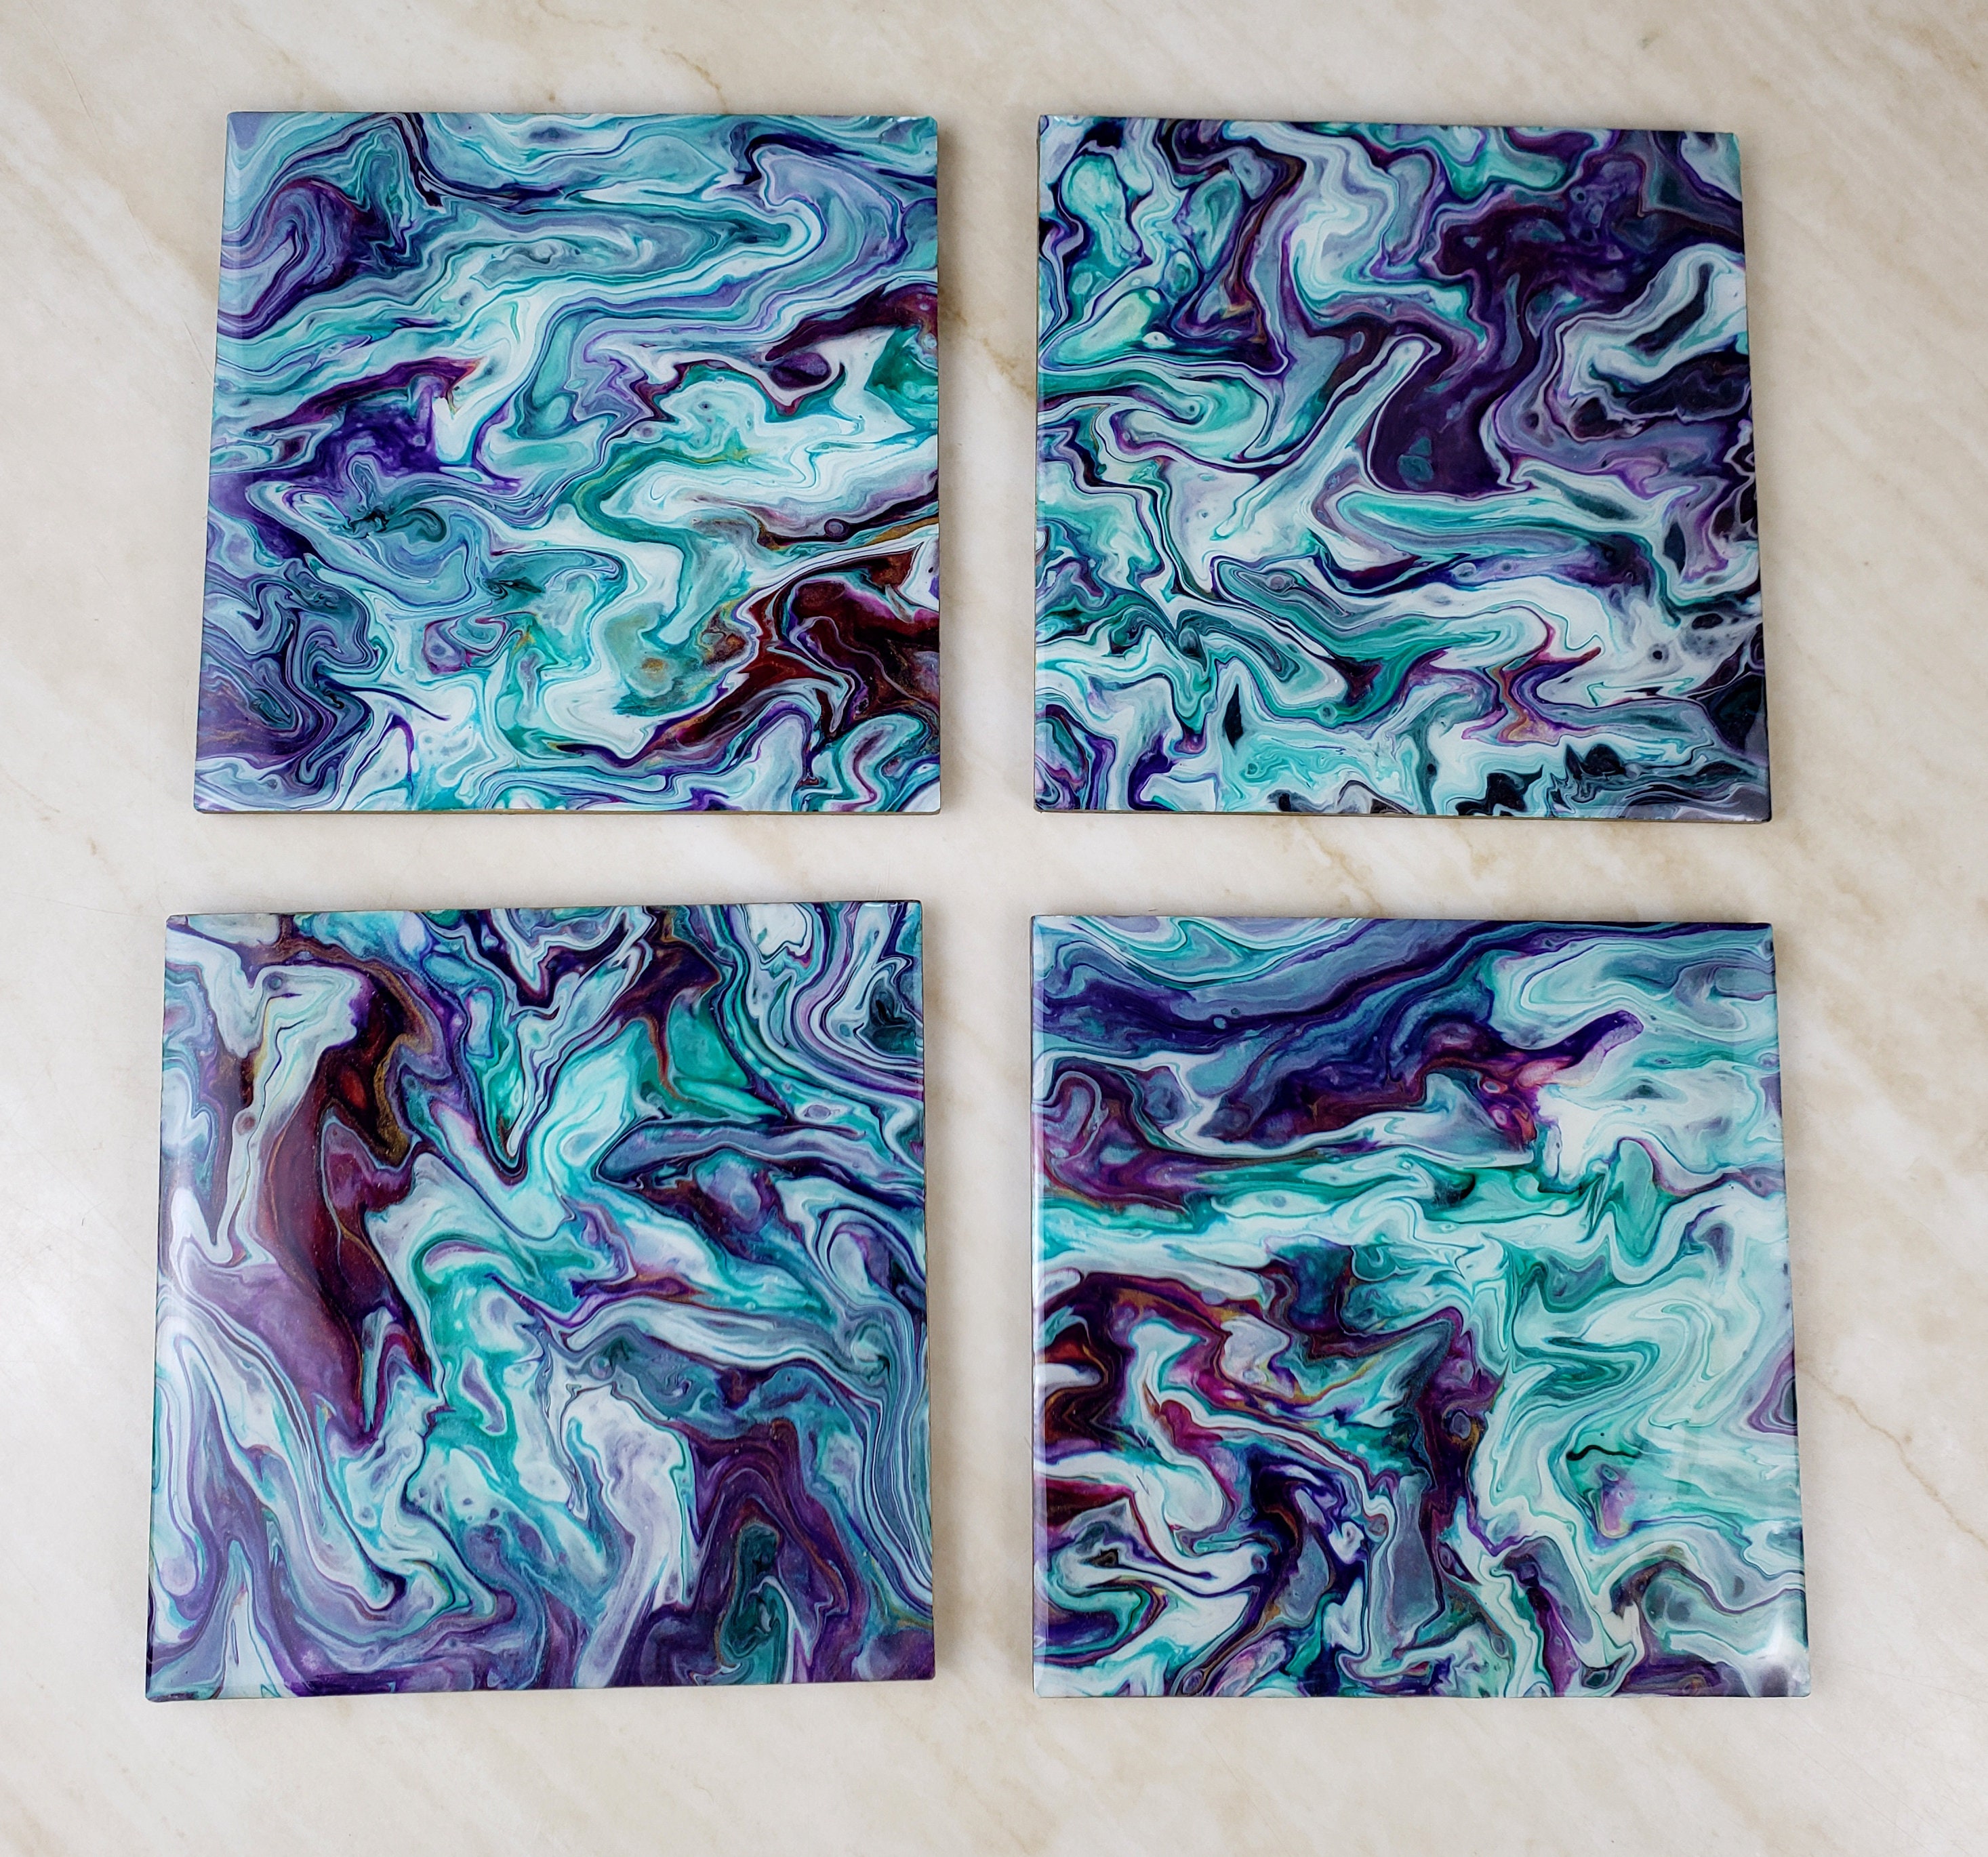 Marble Pour Art Tray - Pinot's Palette Painting